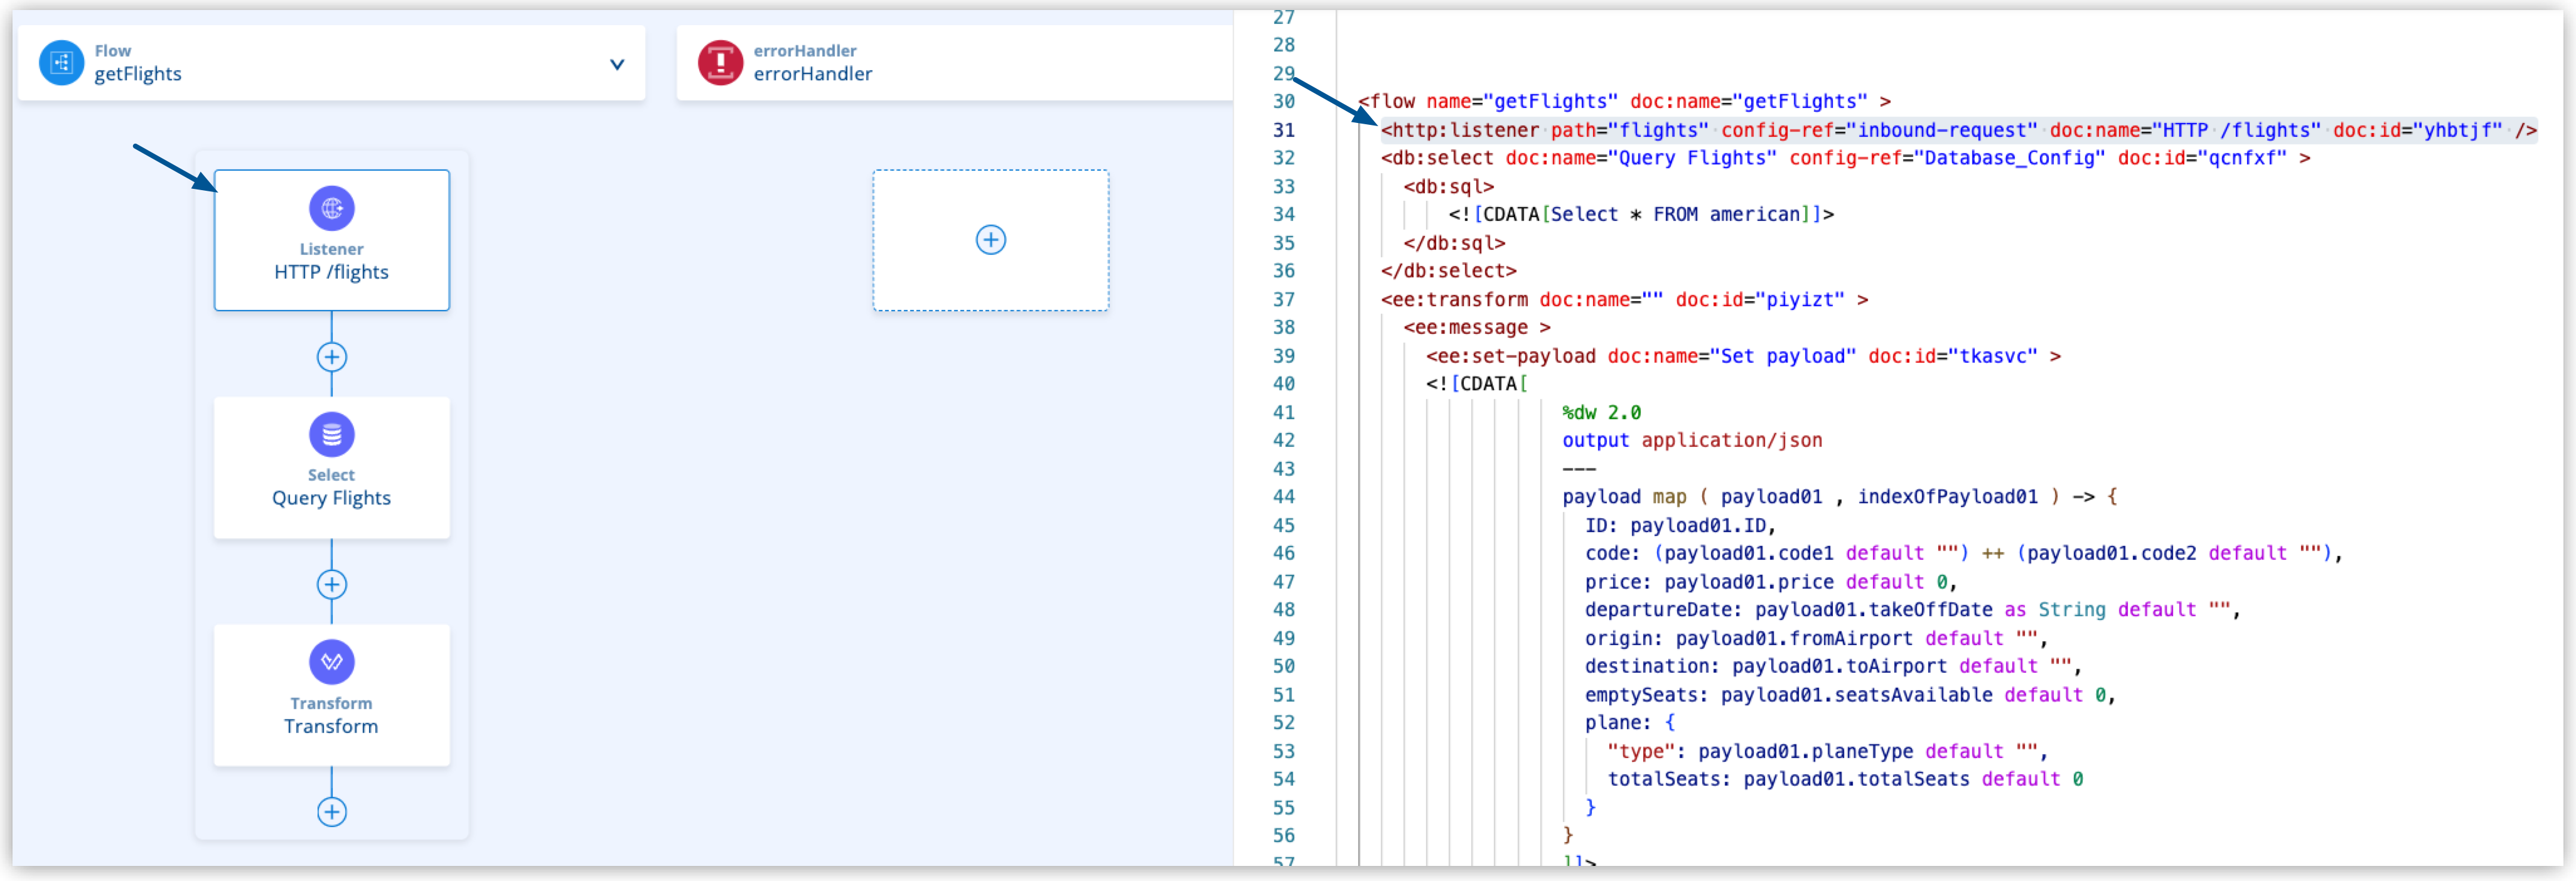 HTTP listener highlighted in the implementation.xml file